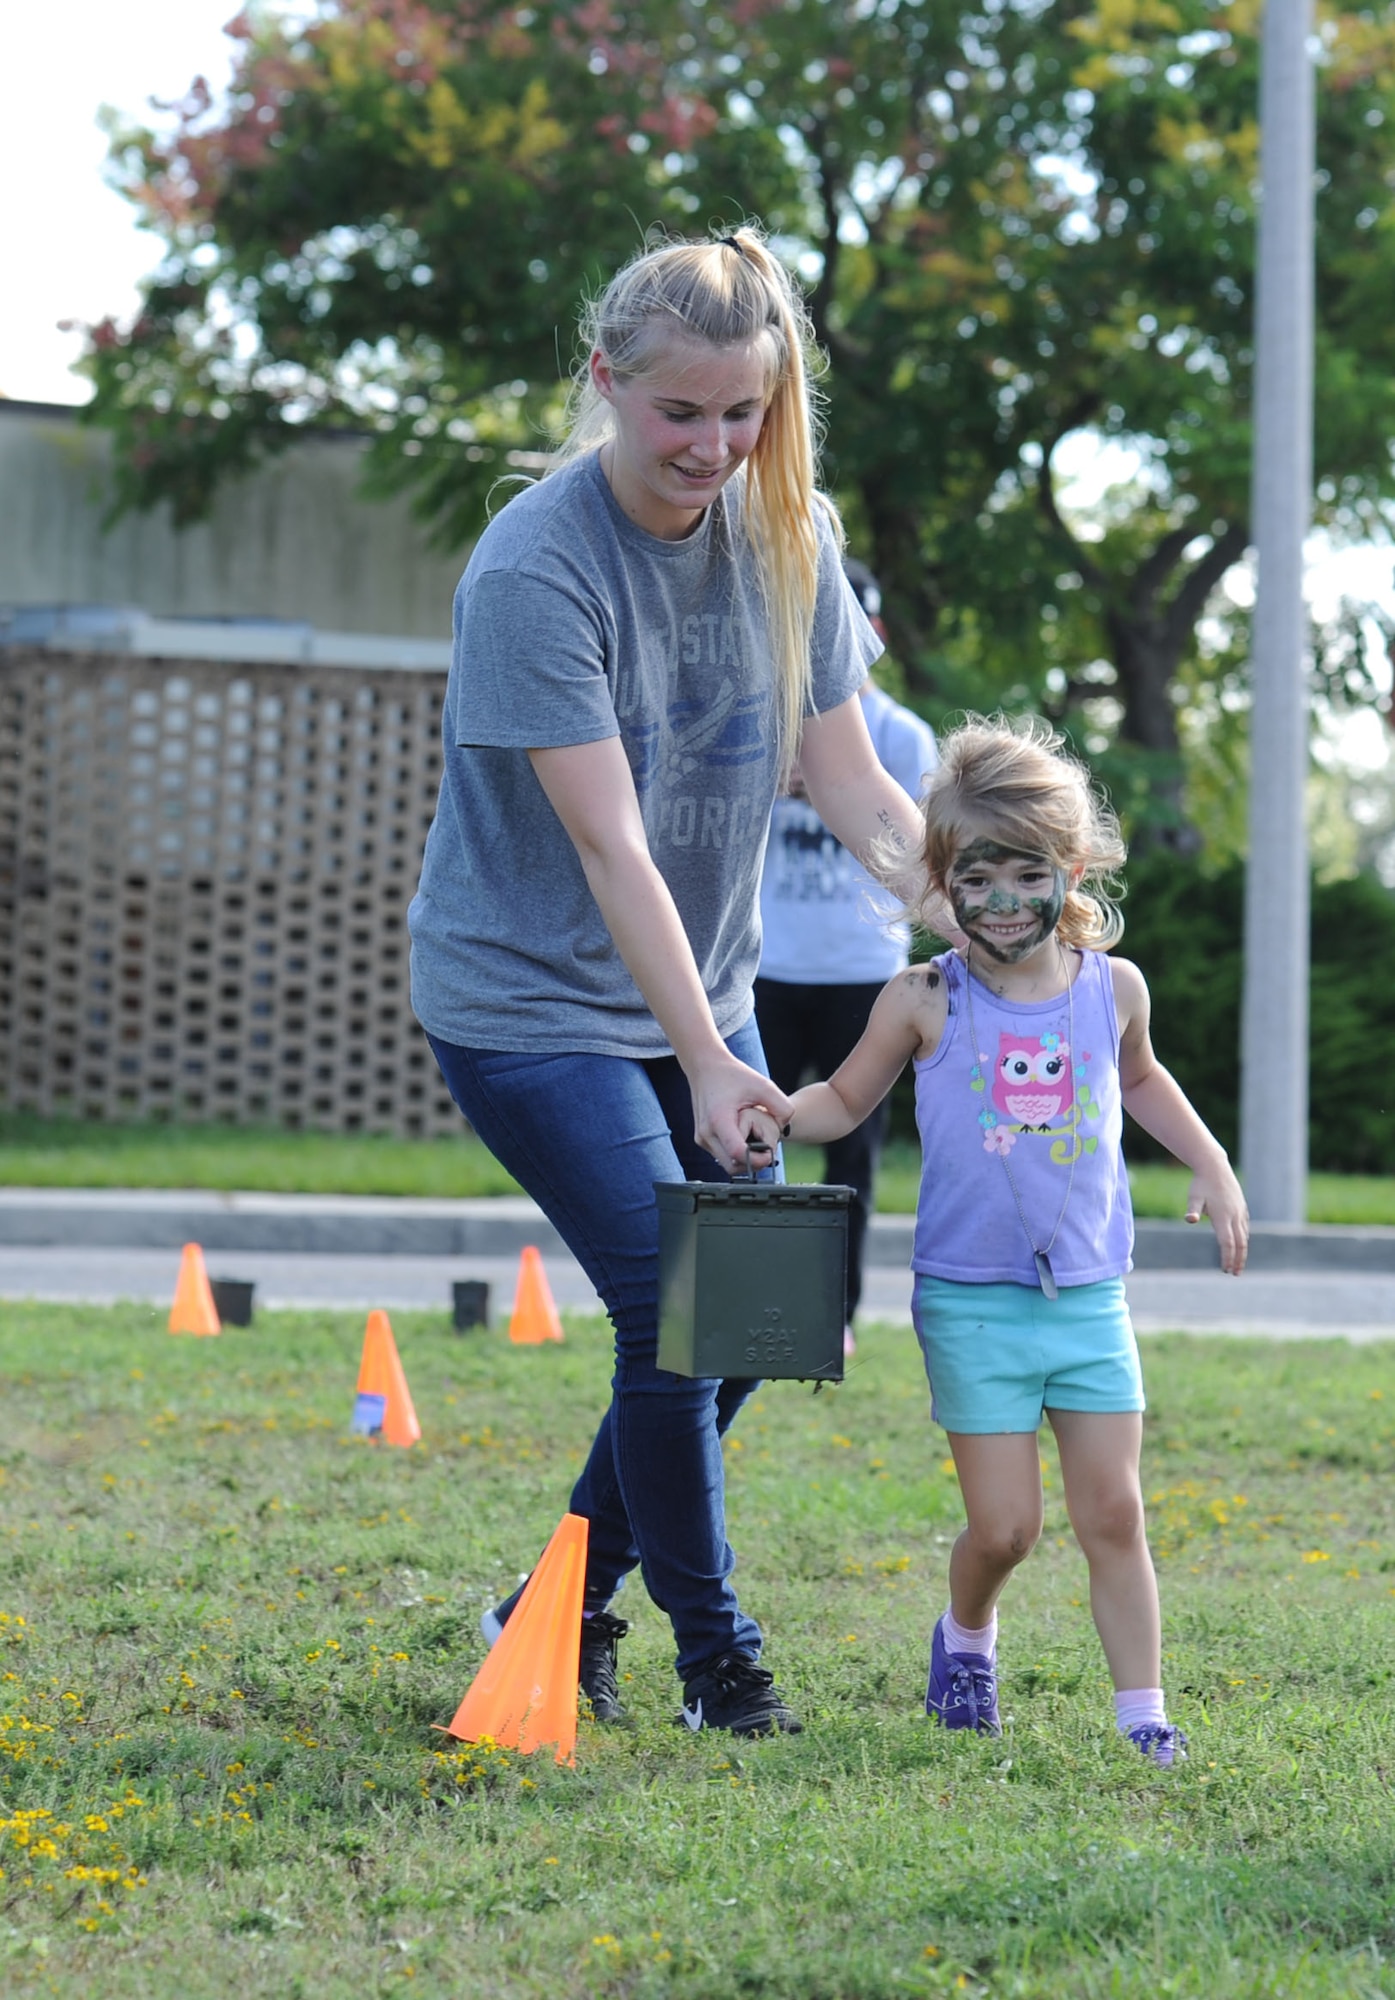 Nicole and Paisley Hoose, complete  the Keesler Marine Detachment obstacle course during Operation Hero Oct. 14, 2017, on Keesler Air Force Base, Mississippi. The event was designed to help children better understand what their parents do when they deploy. (U.S. Air Force photo by Kemberly Groue)